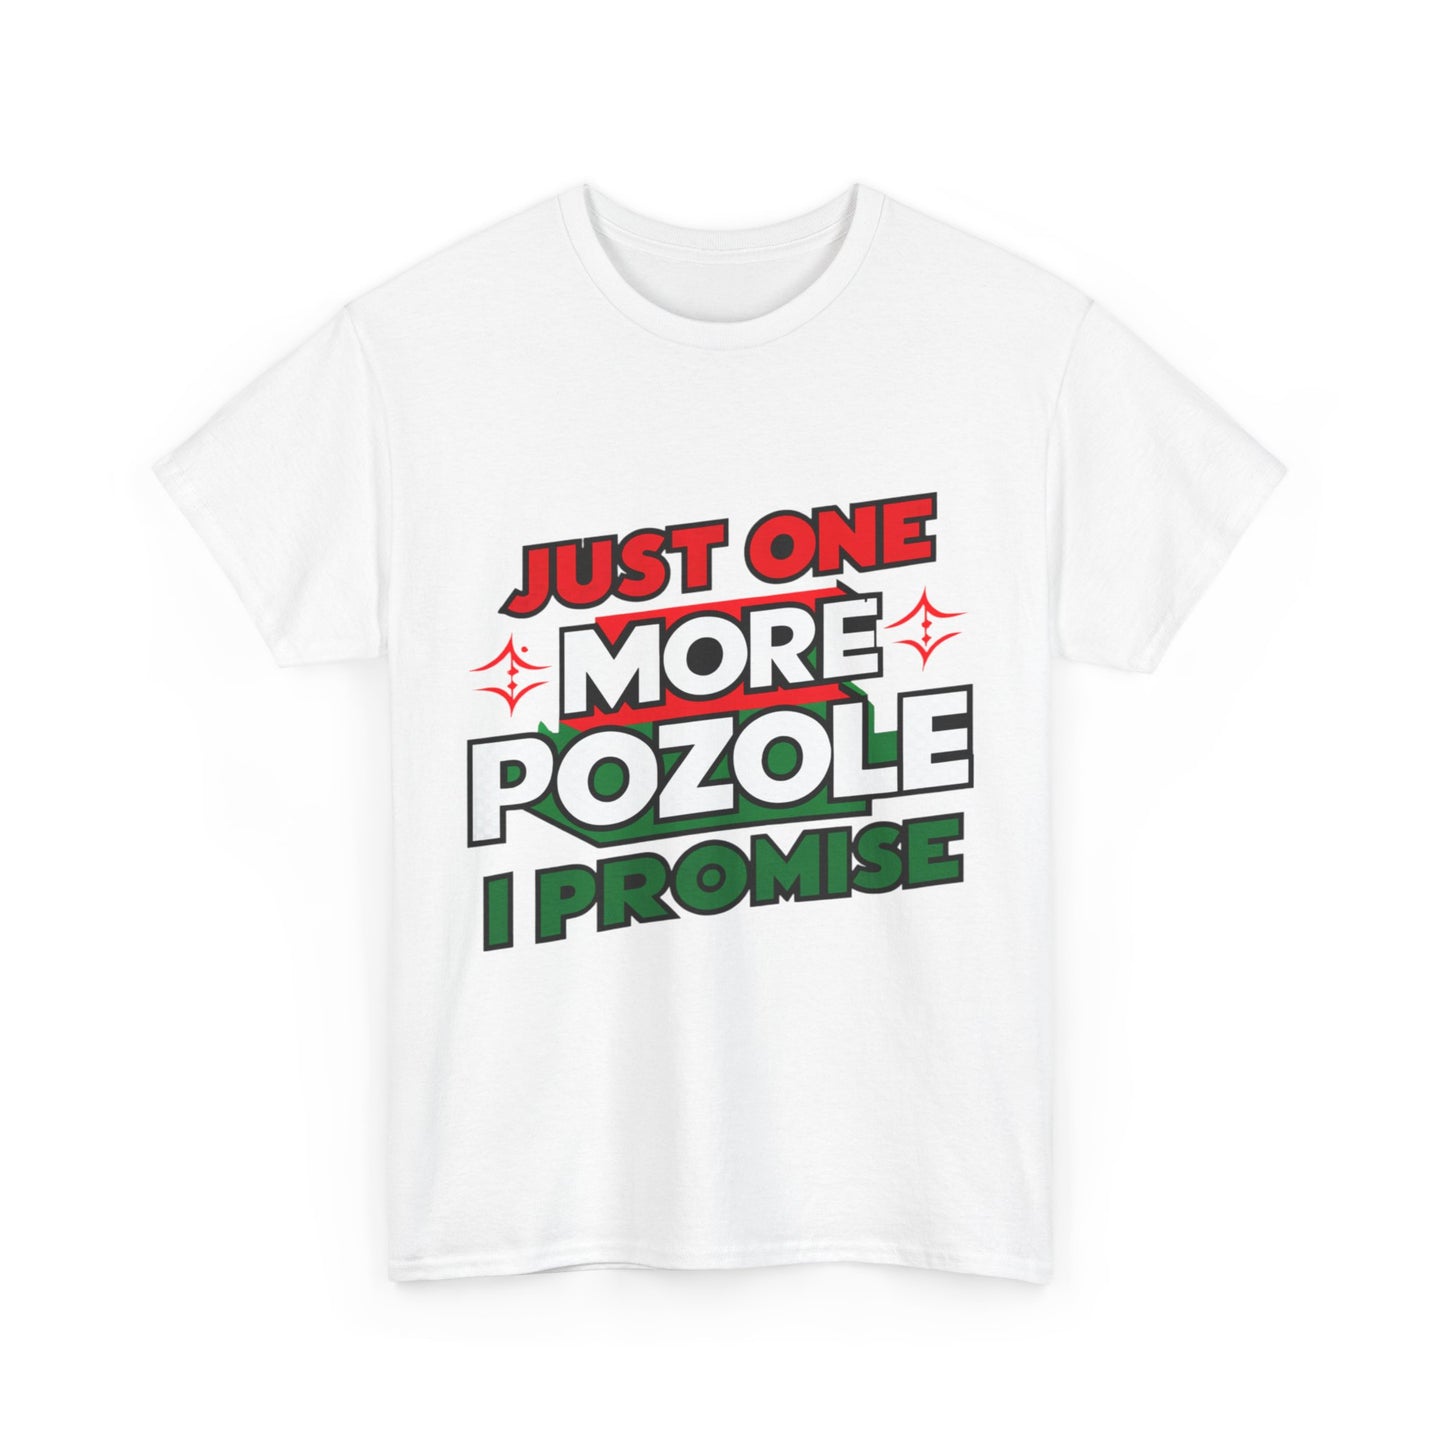 Just One More Pozole I Promise Mexican Food Graphic Unisex Heavy Cotton Tee Cotton Funny Humorous Graphic Soft Premium Unisex Men Women White T-shirt Birthday Gift-42